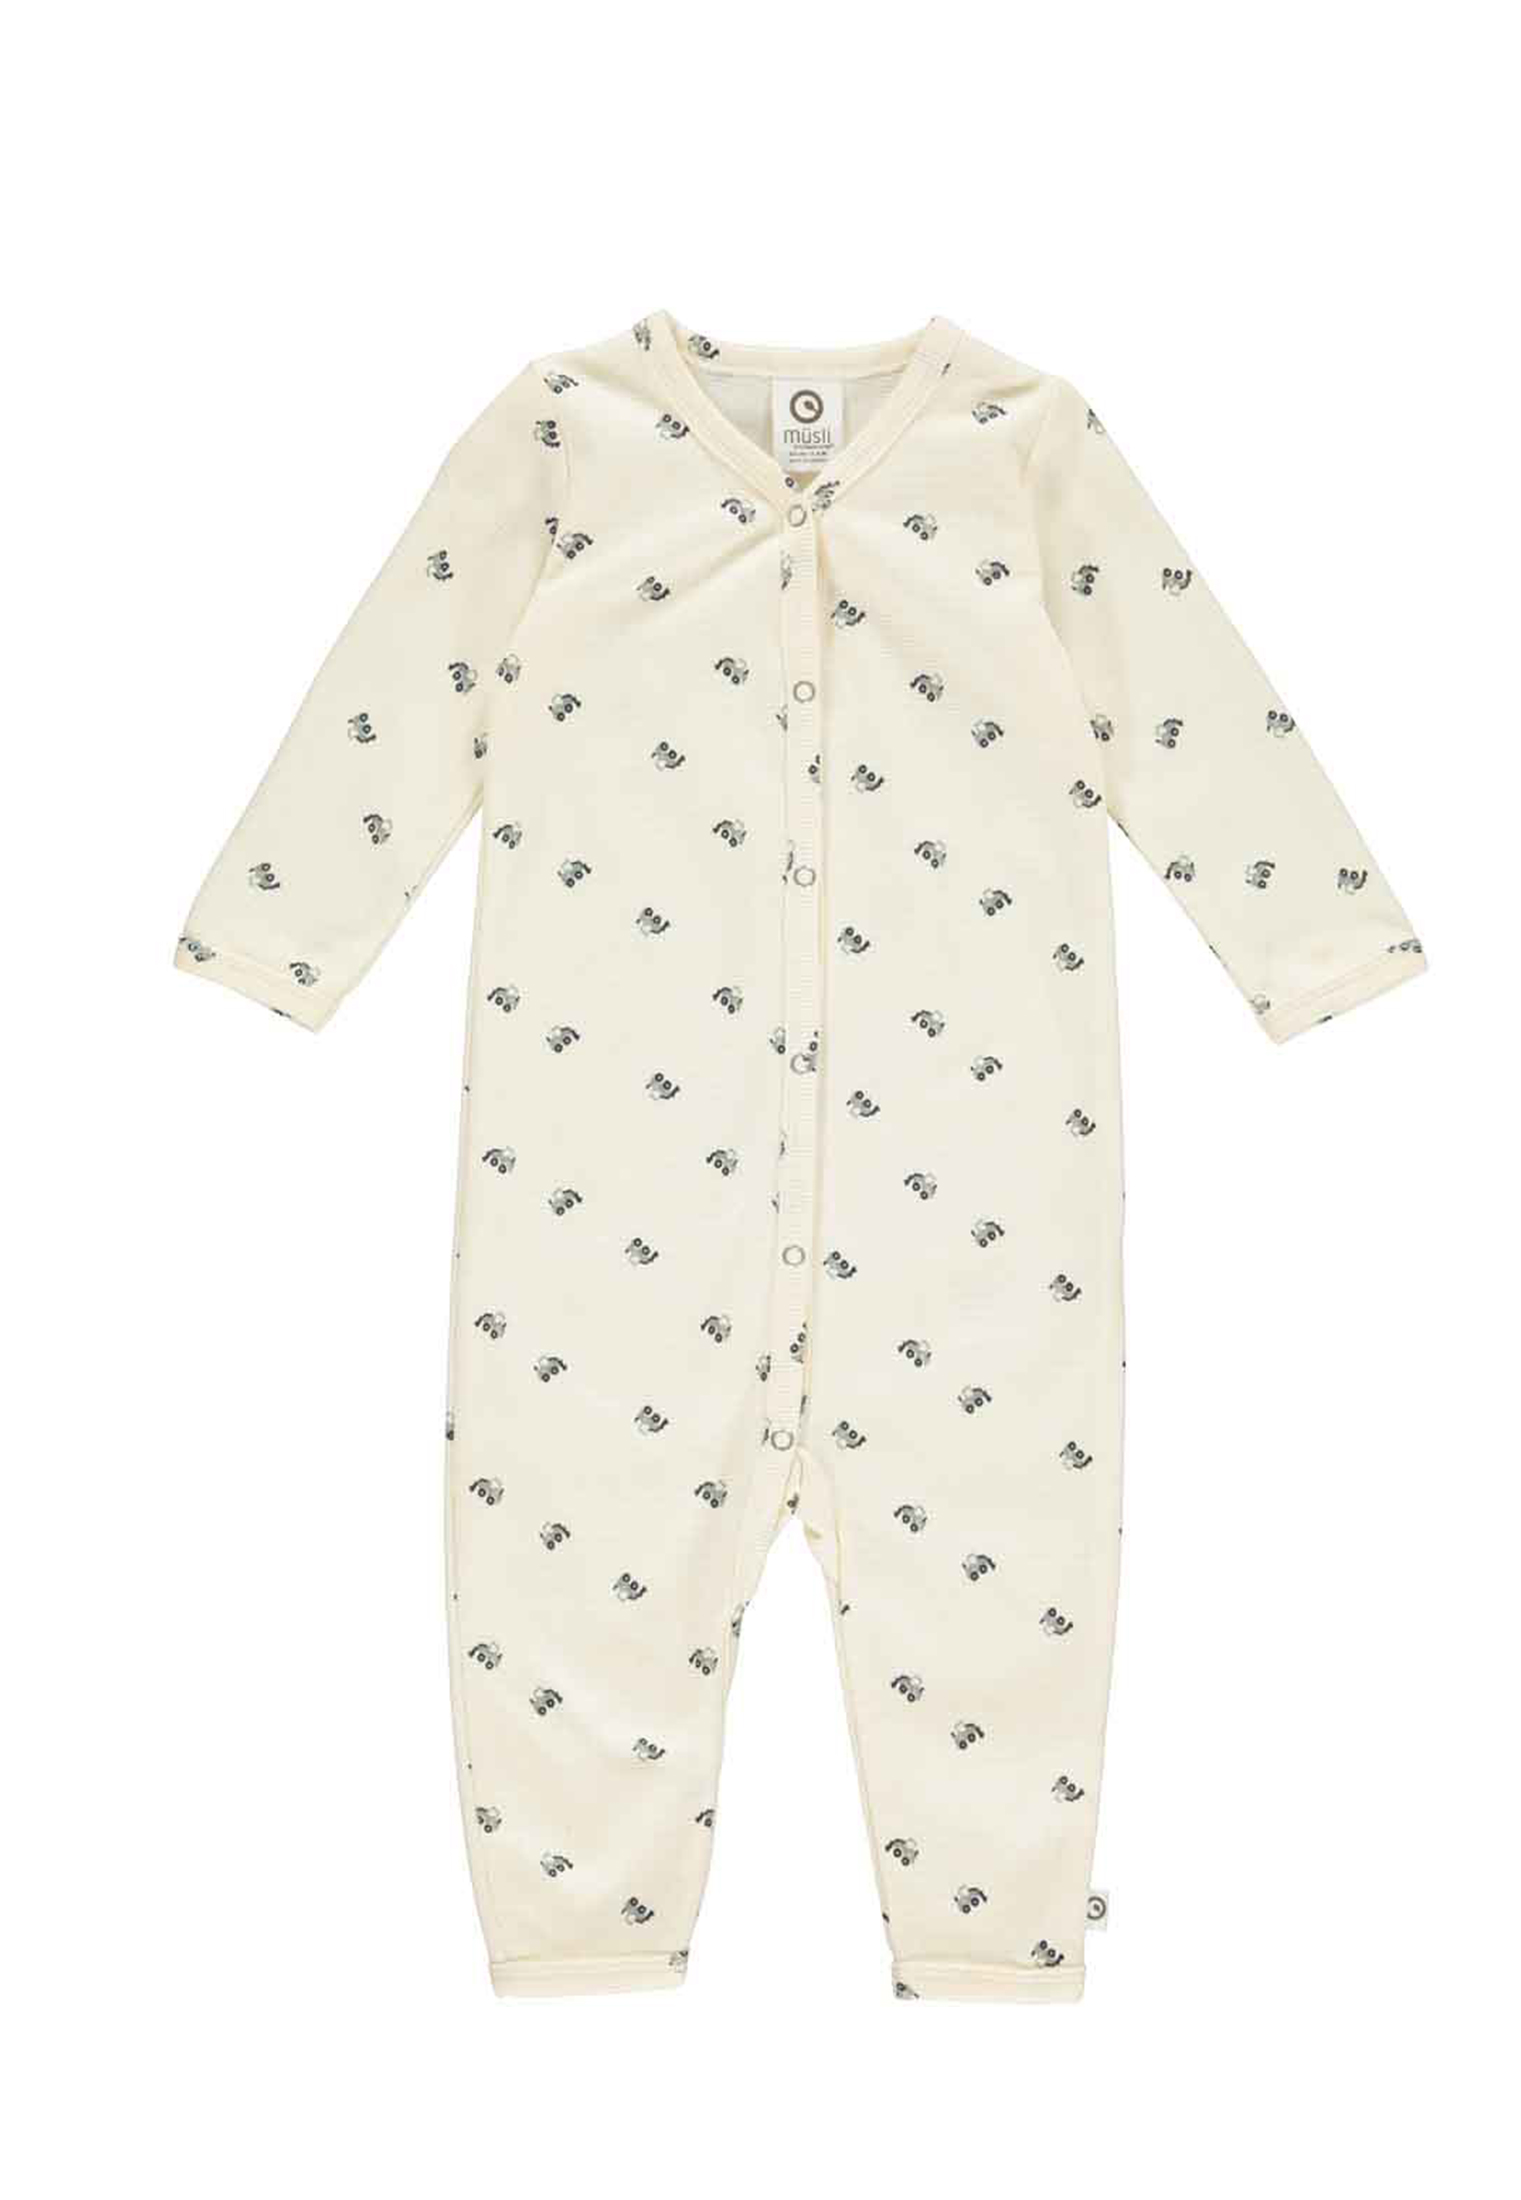 MAMA.LICIOUS Baby one-piece suit -Buttercream/Green - 1584061300